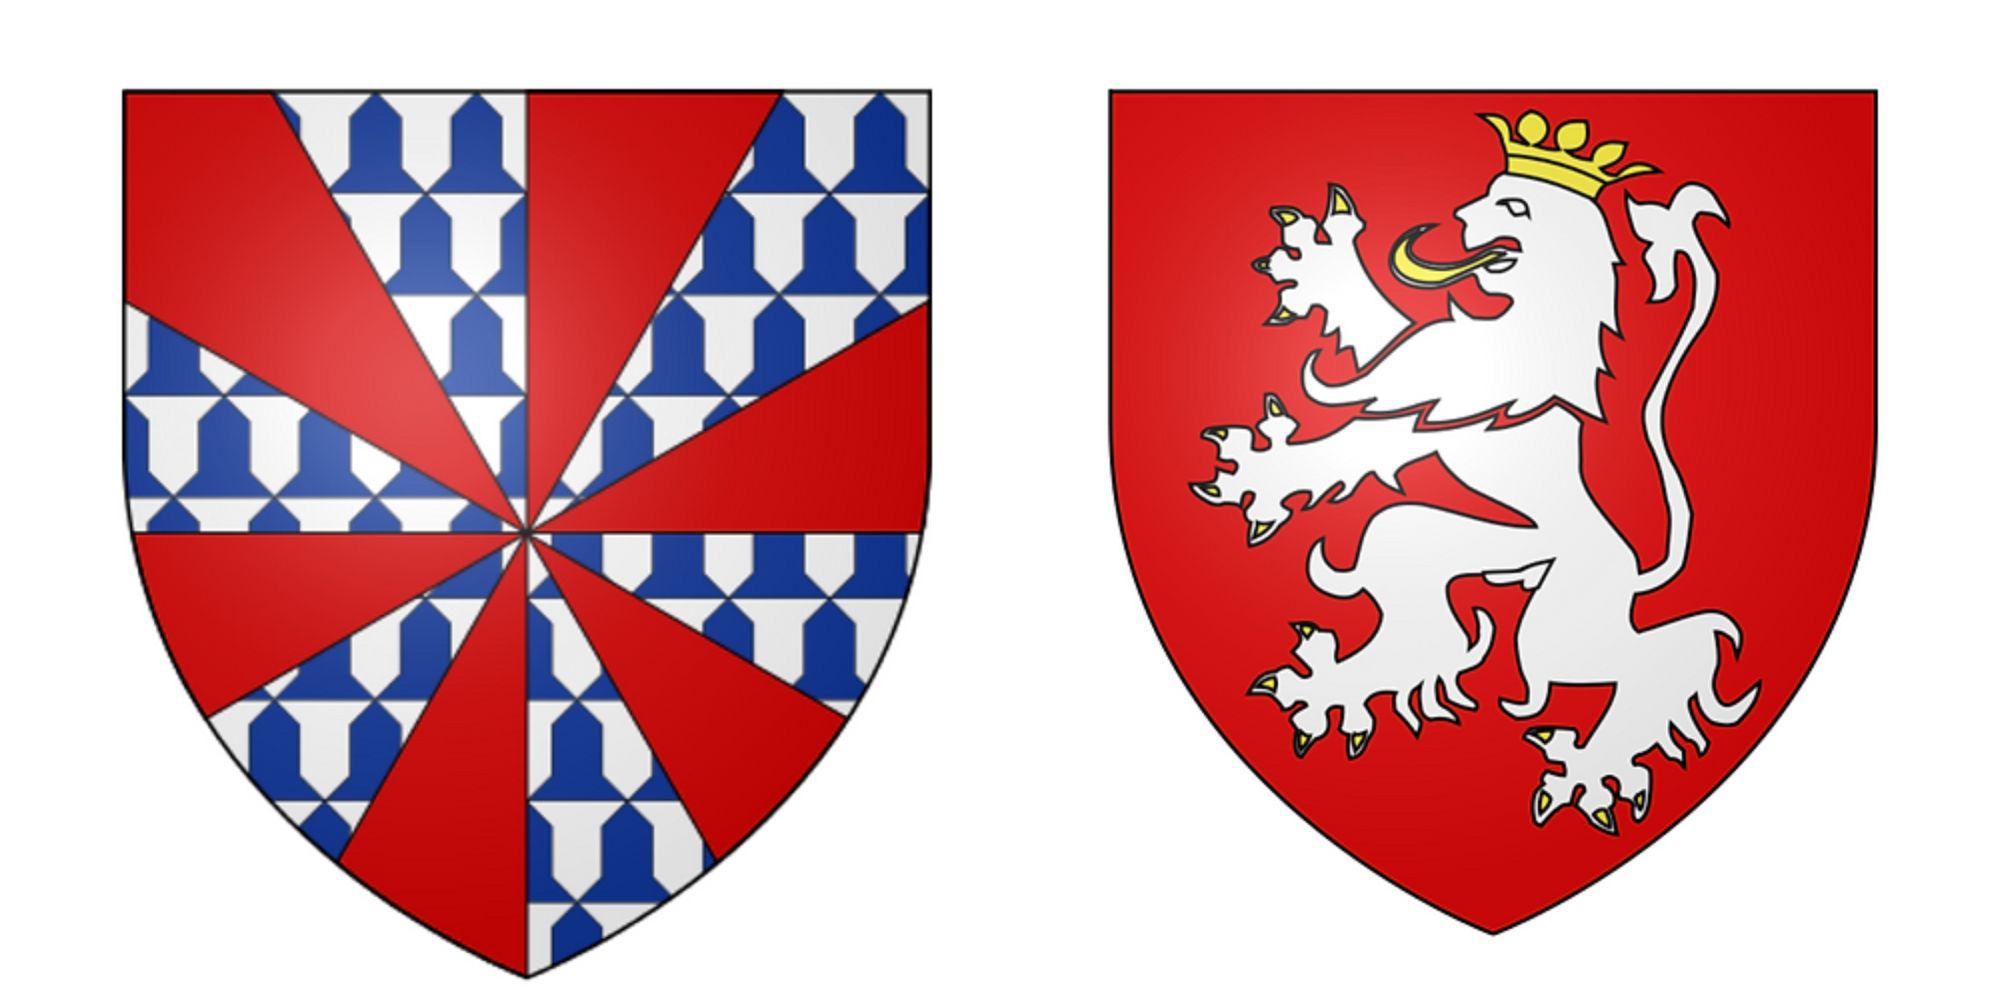 Coat of Arms for the Lioness of Brittany